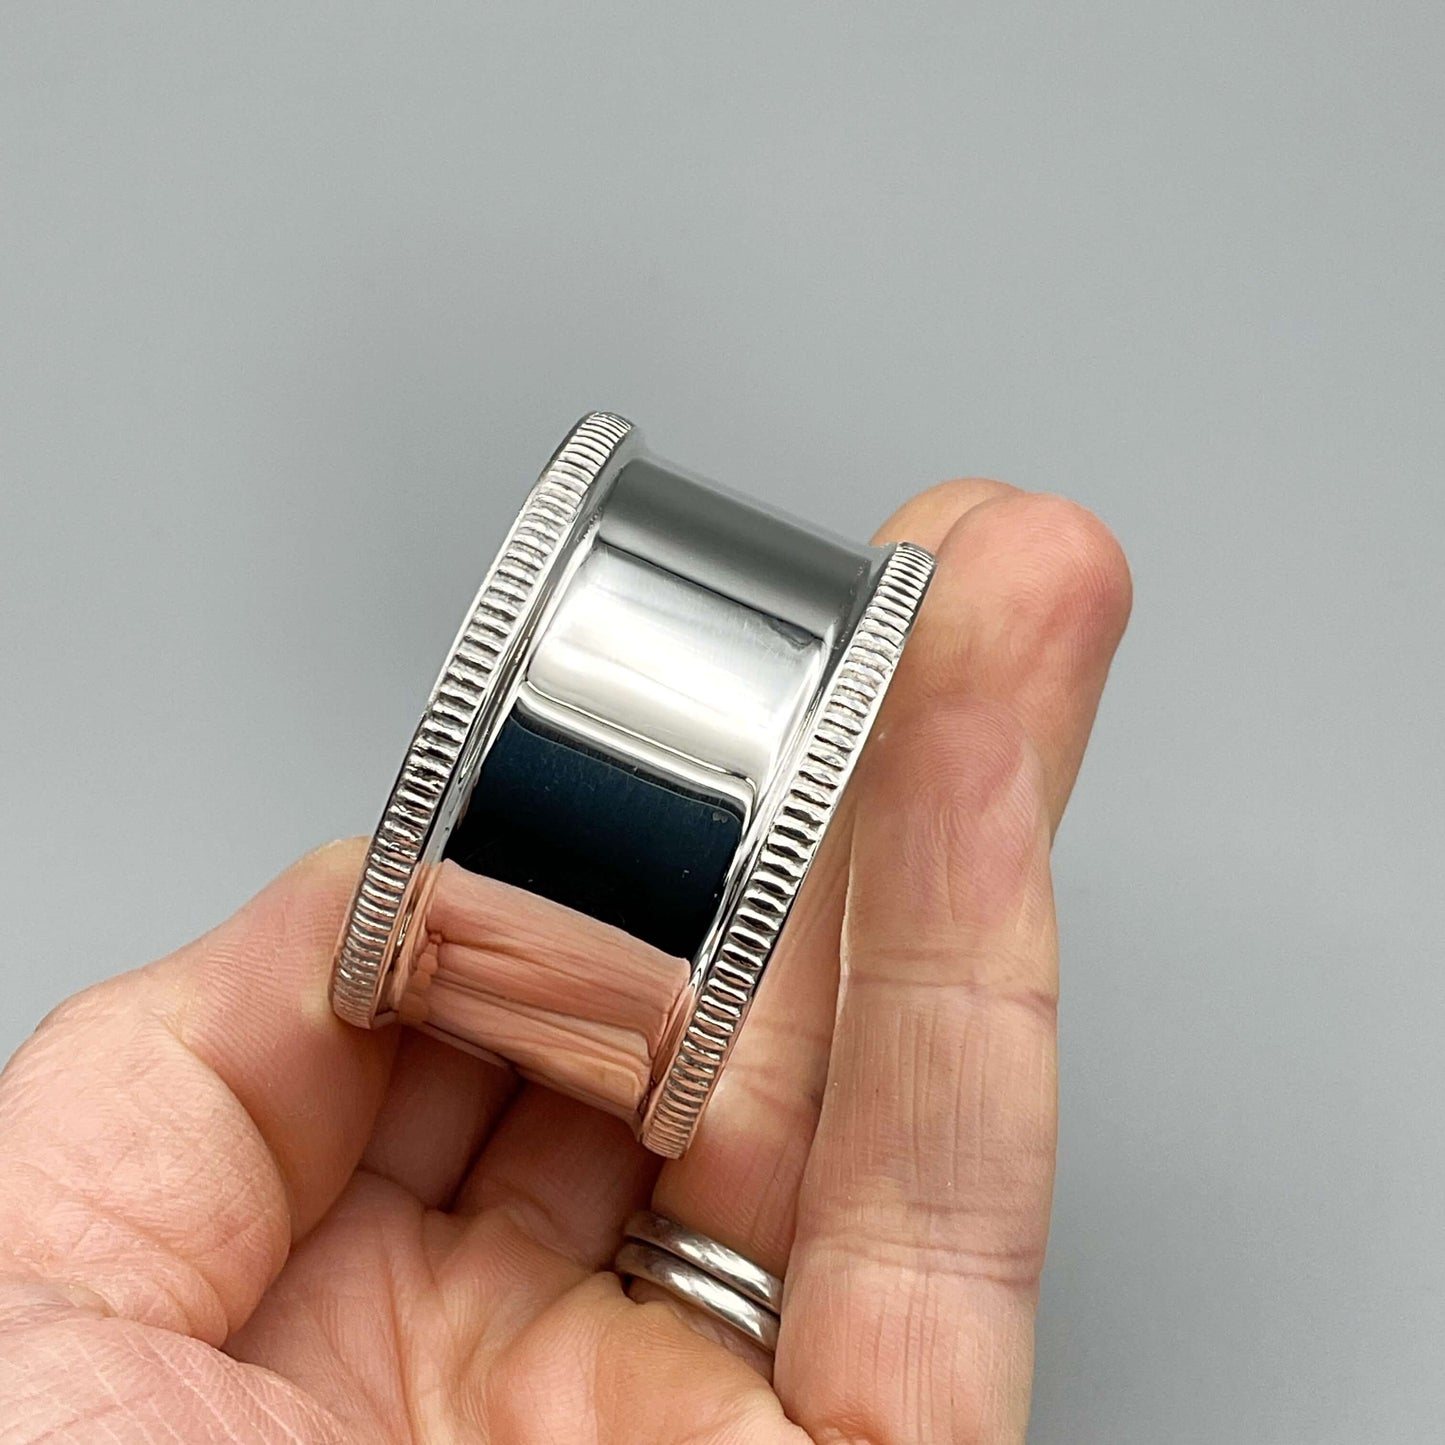 Shiny silver napkin ring held in a hand